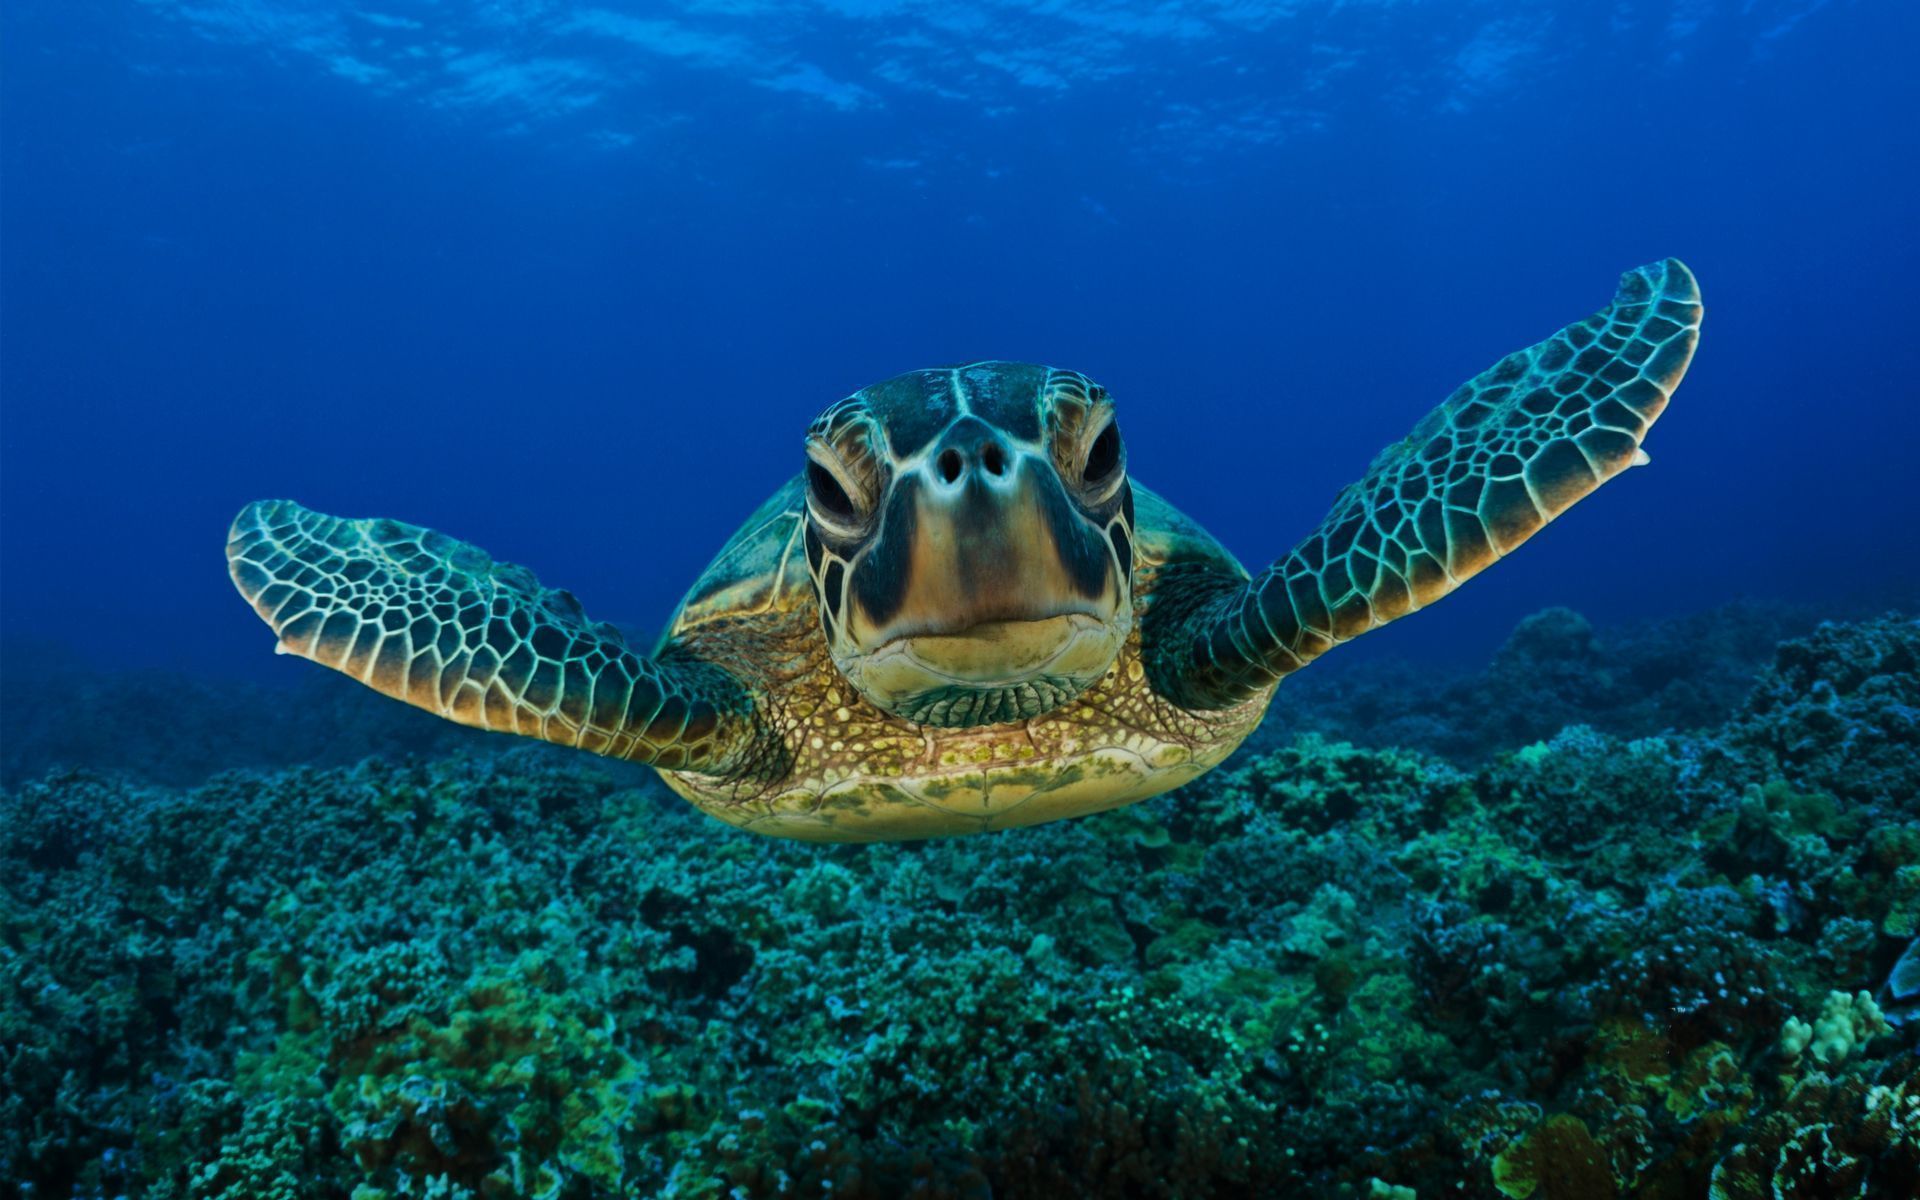 194 Turtle HD Wallpapers Backgrounds - Wallpaper Abyss